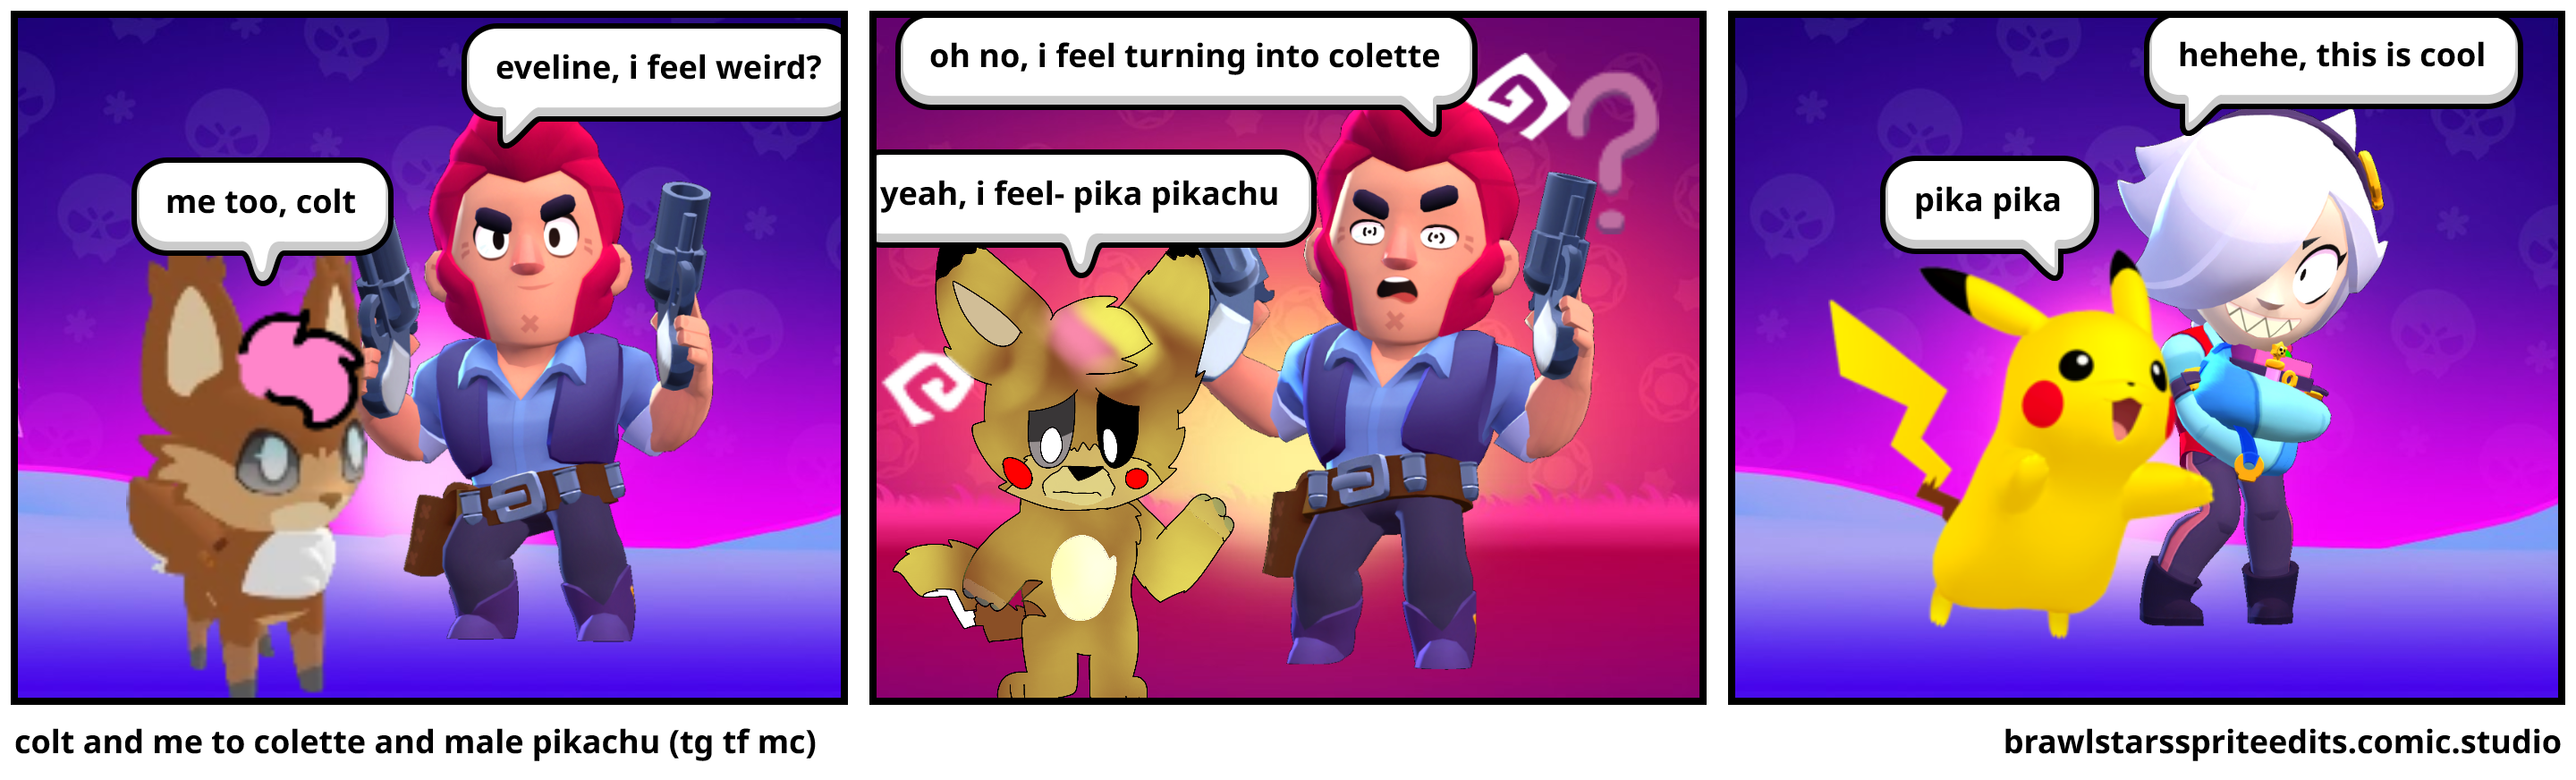 colt and me to colette and male pikachu (tg tf mc)